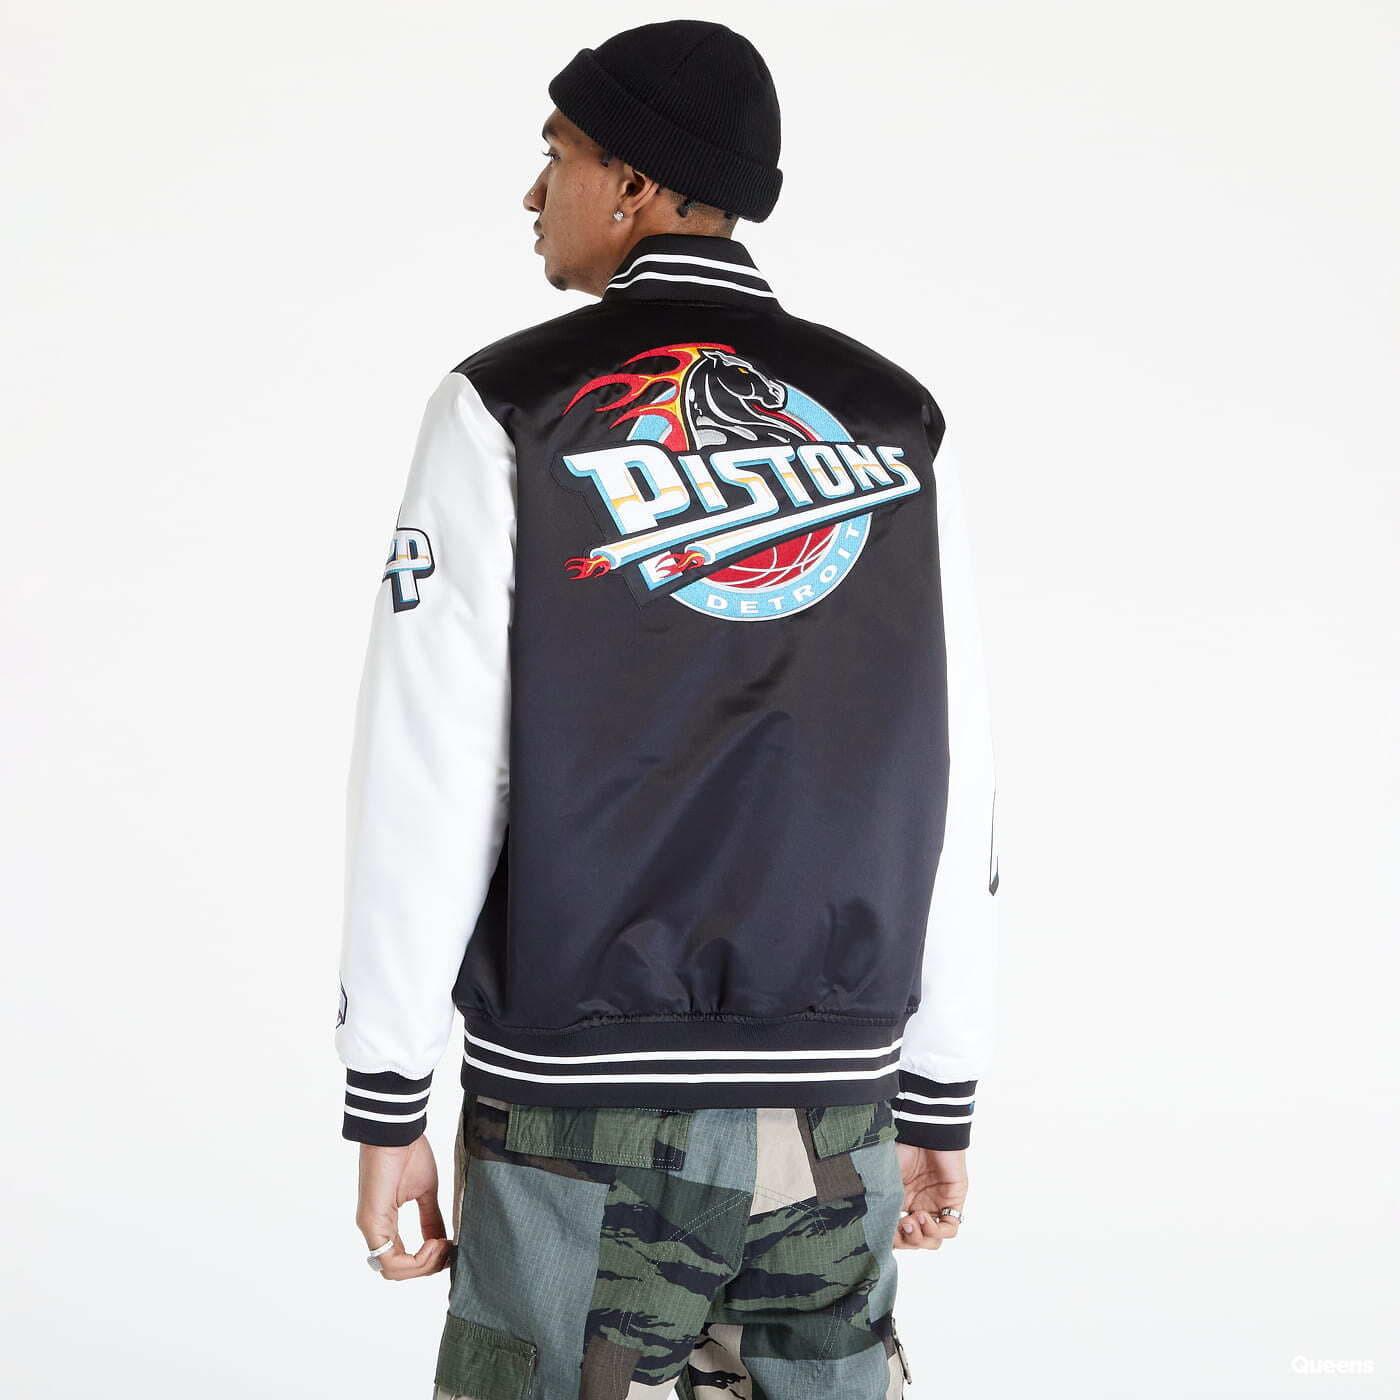 Detroit Pistons Heavyweight Jacket by Vintage Detroit Collection